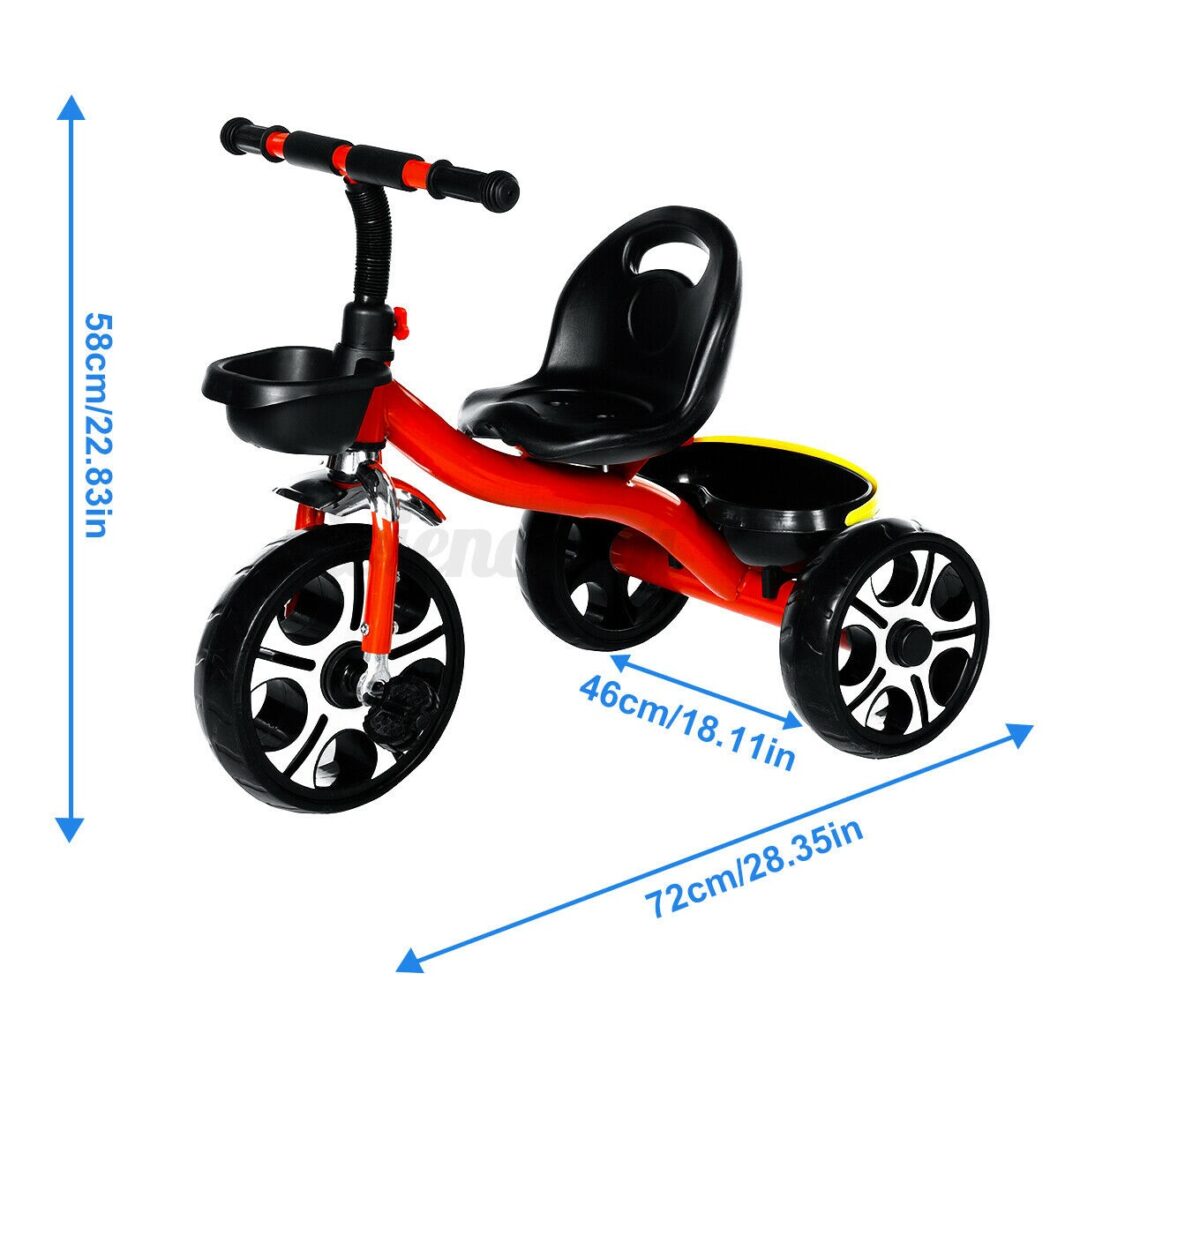 Folding-Child-Kids-Toddler-Tricycle-Bicycle-3-Wheels-_57